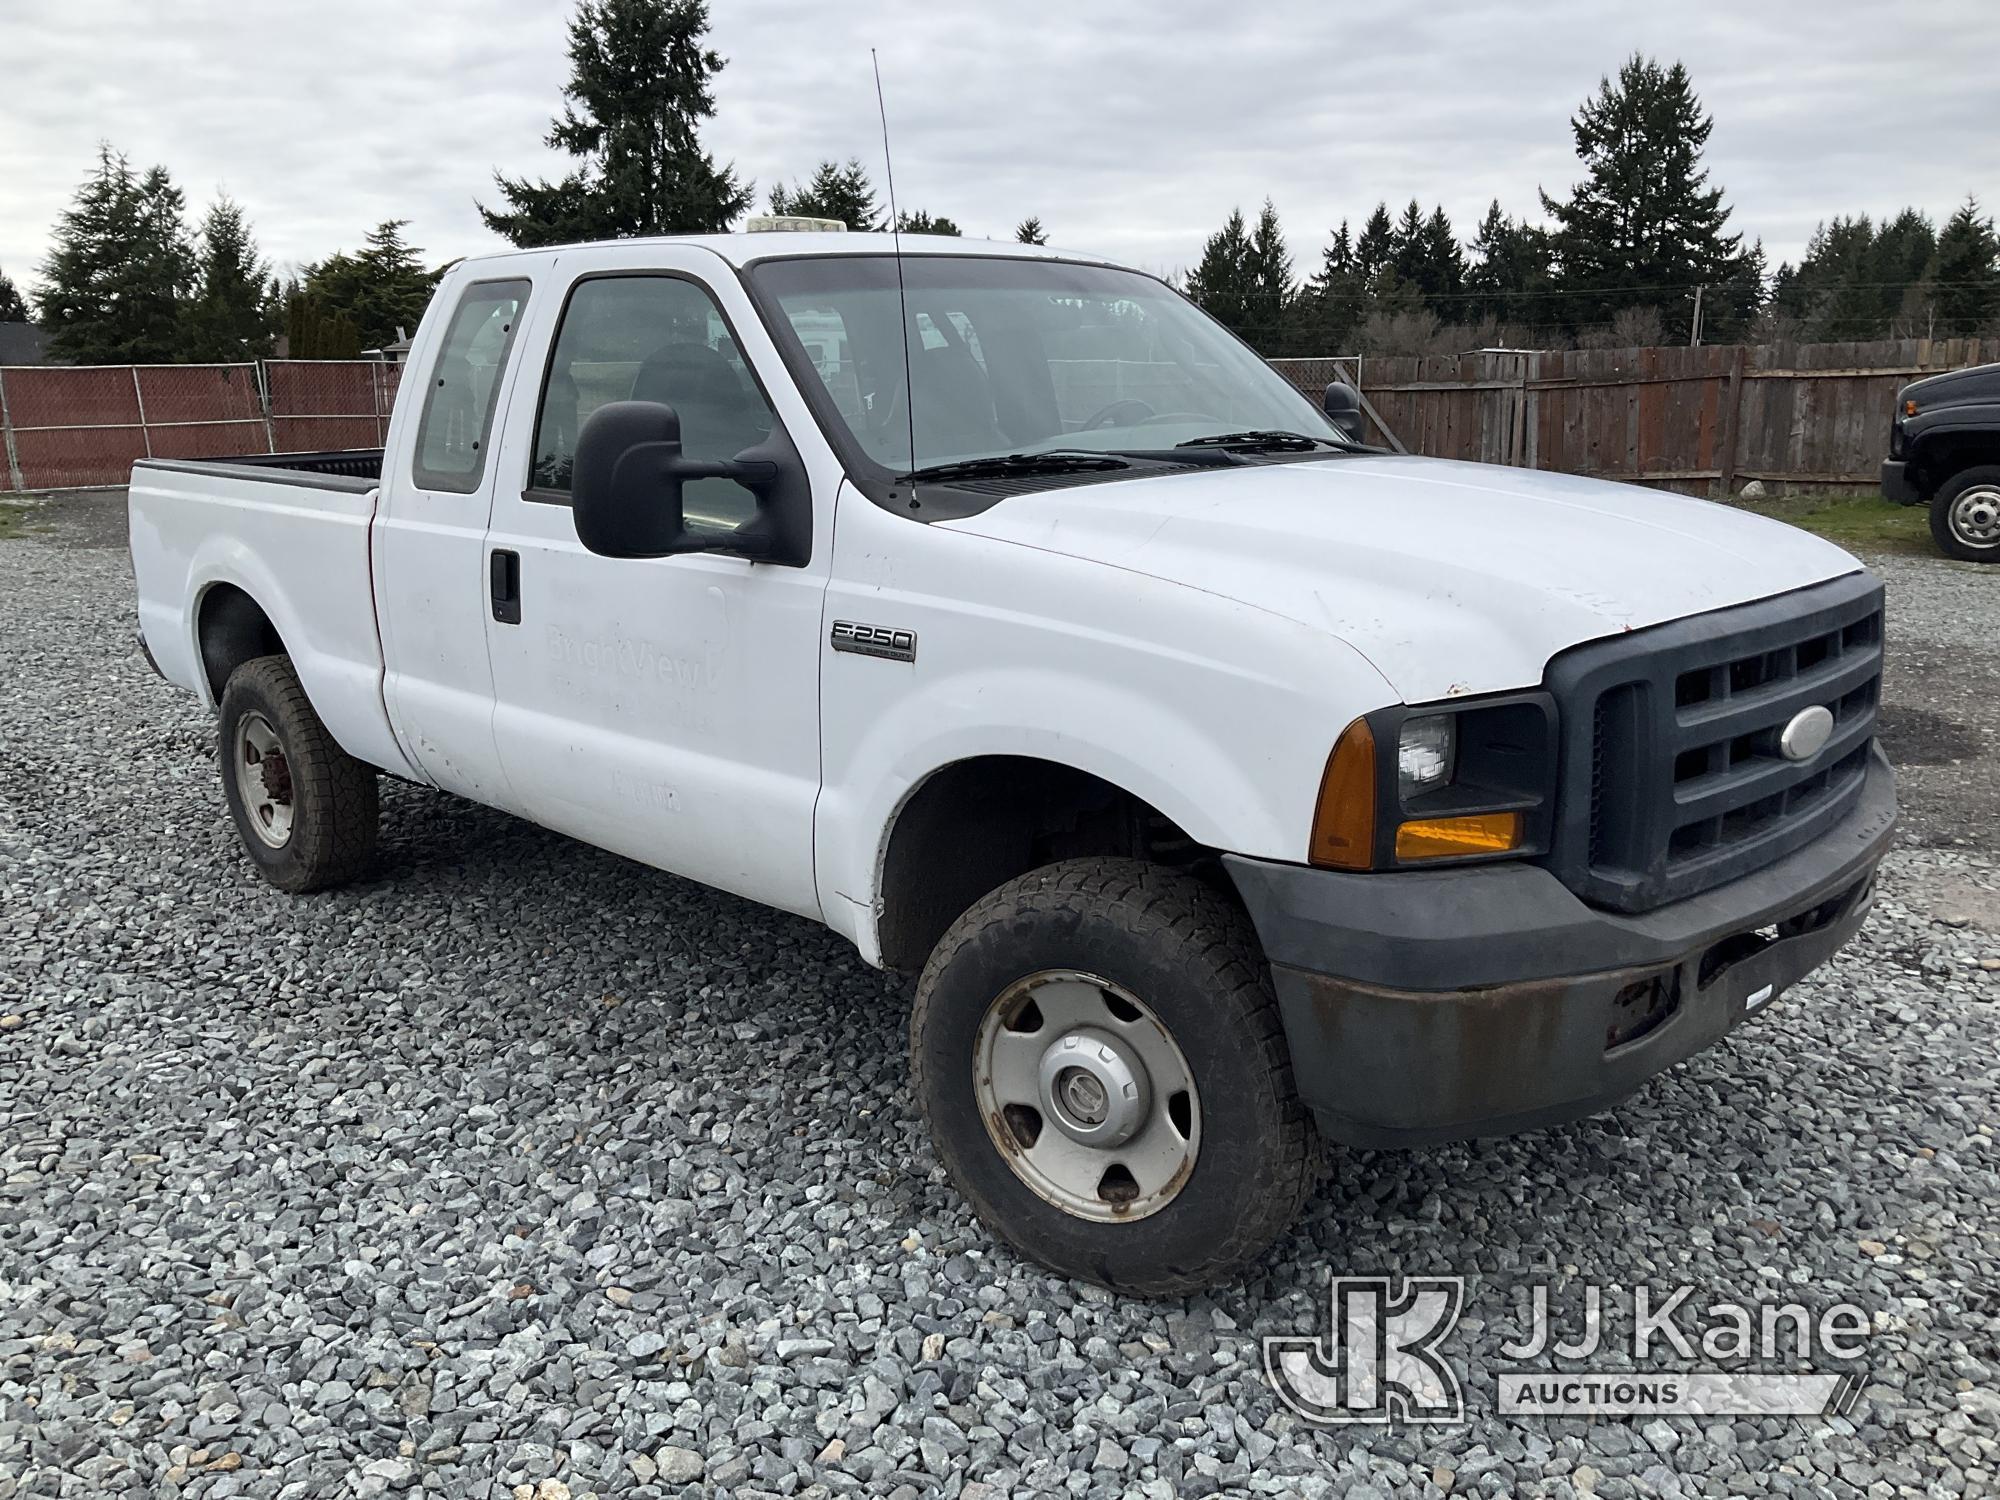 (Tacoma, WA) 2006 Ford F250 4x4 Extended-Cab Pickup Truck Not Running, Condition Unknown, Check Engi